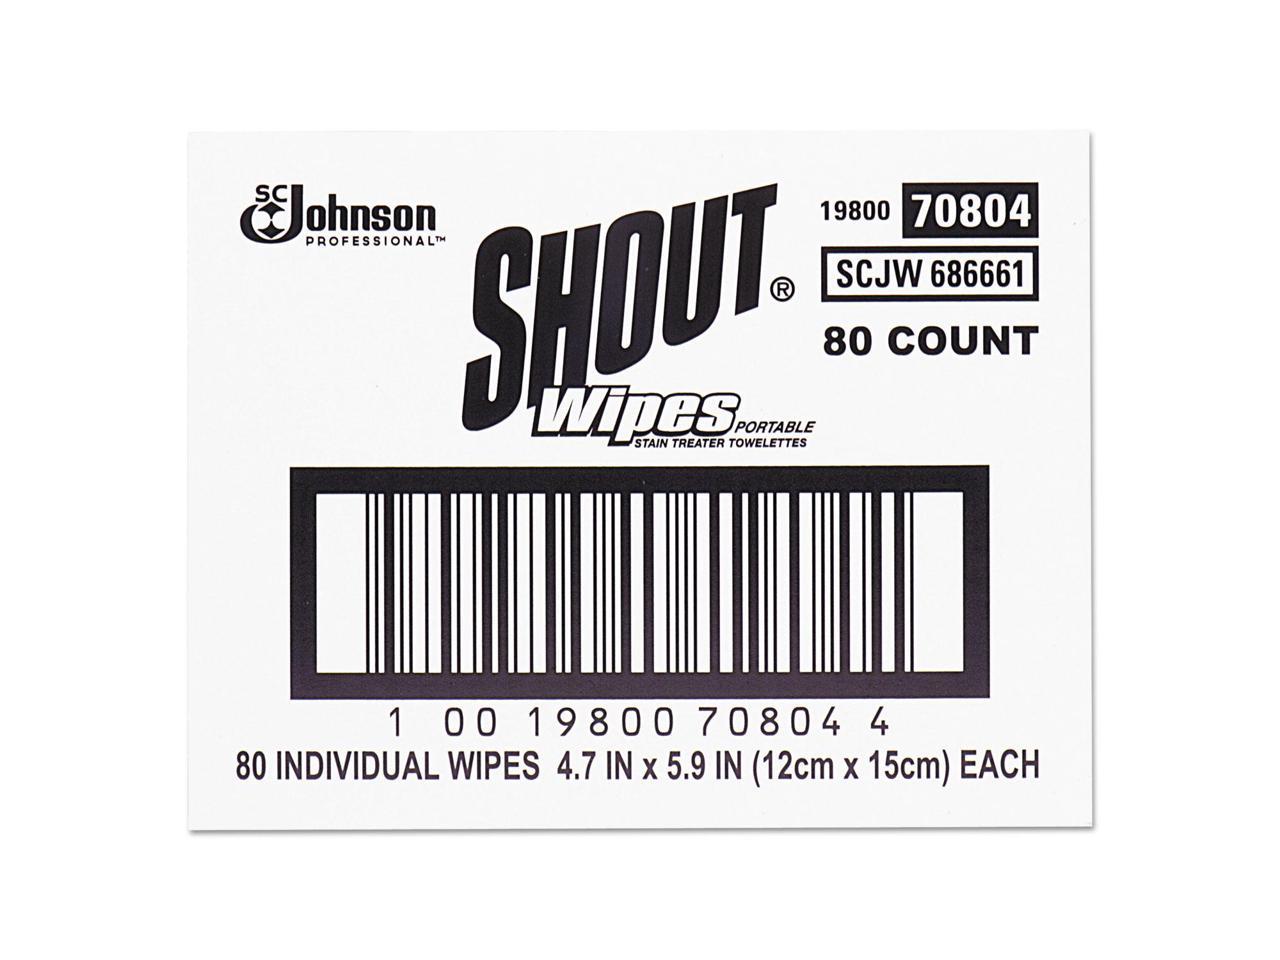 Shout Wipe & Go Instant Stain Remover Wipes 2 Packs = 24 Individual Wipes 